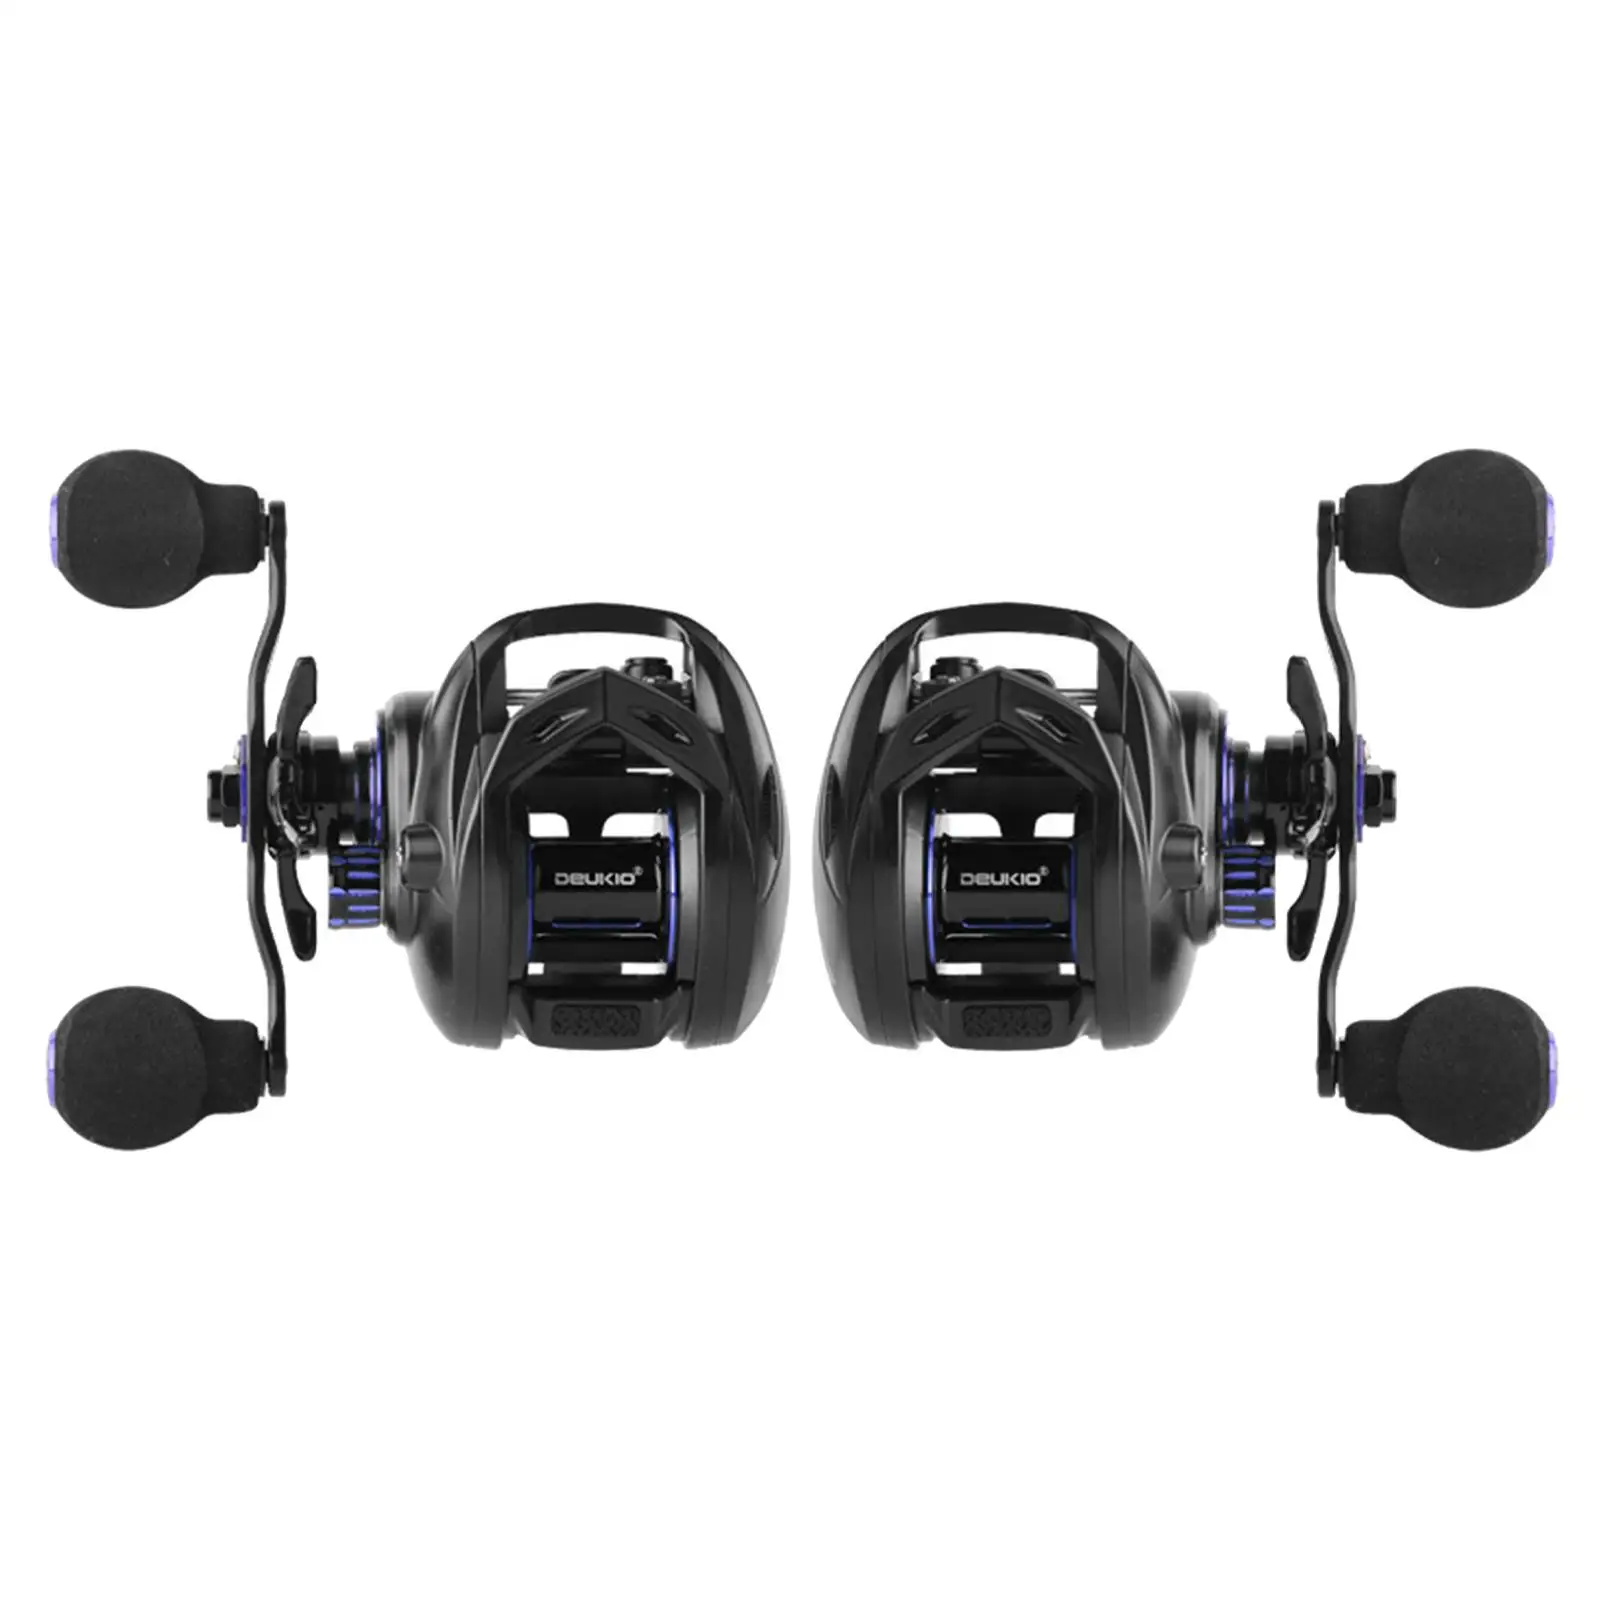 High Speed Fishing reels 5+1 BB 6.3:1 Gear Ratio up to 8kg casting reels